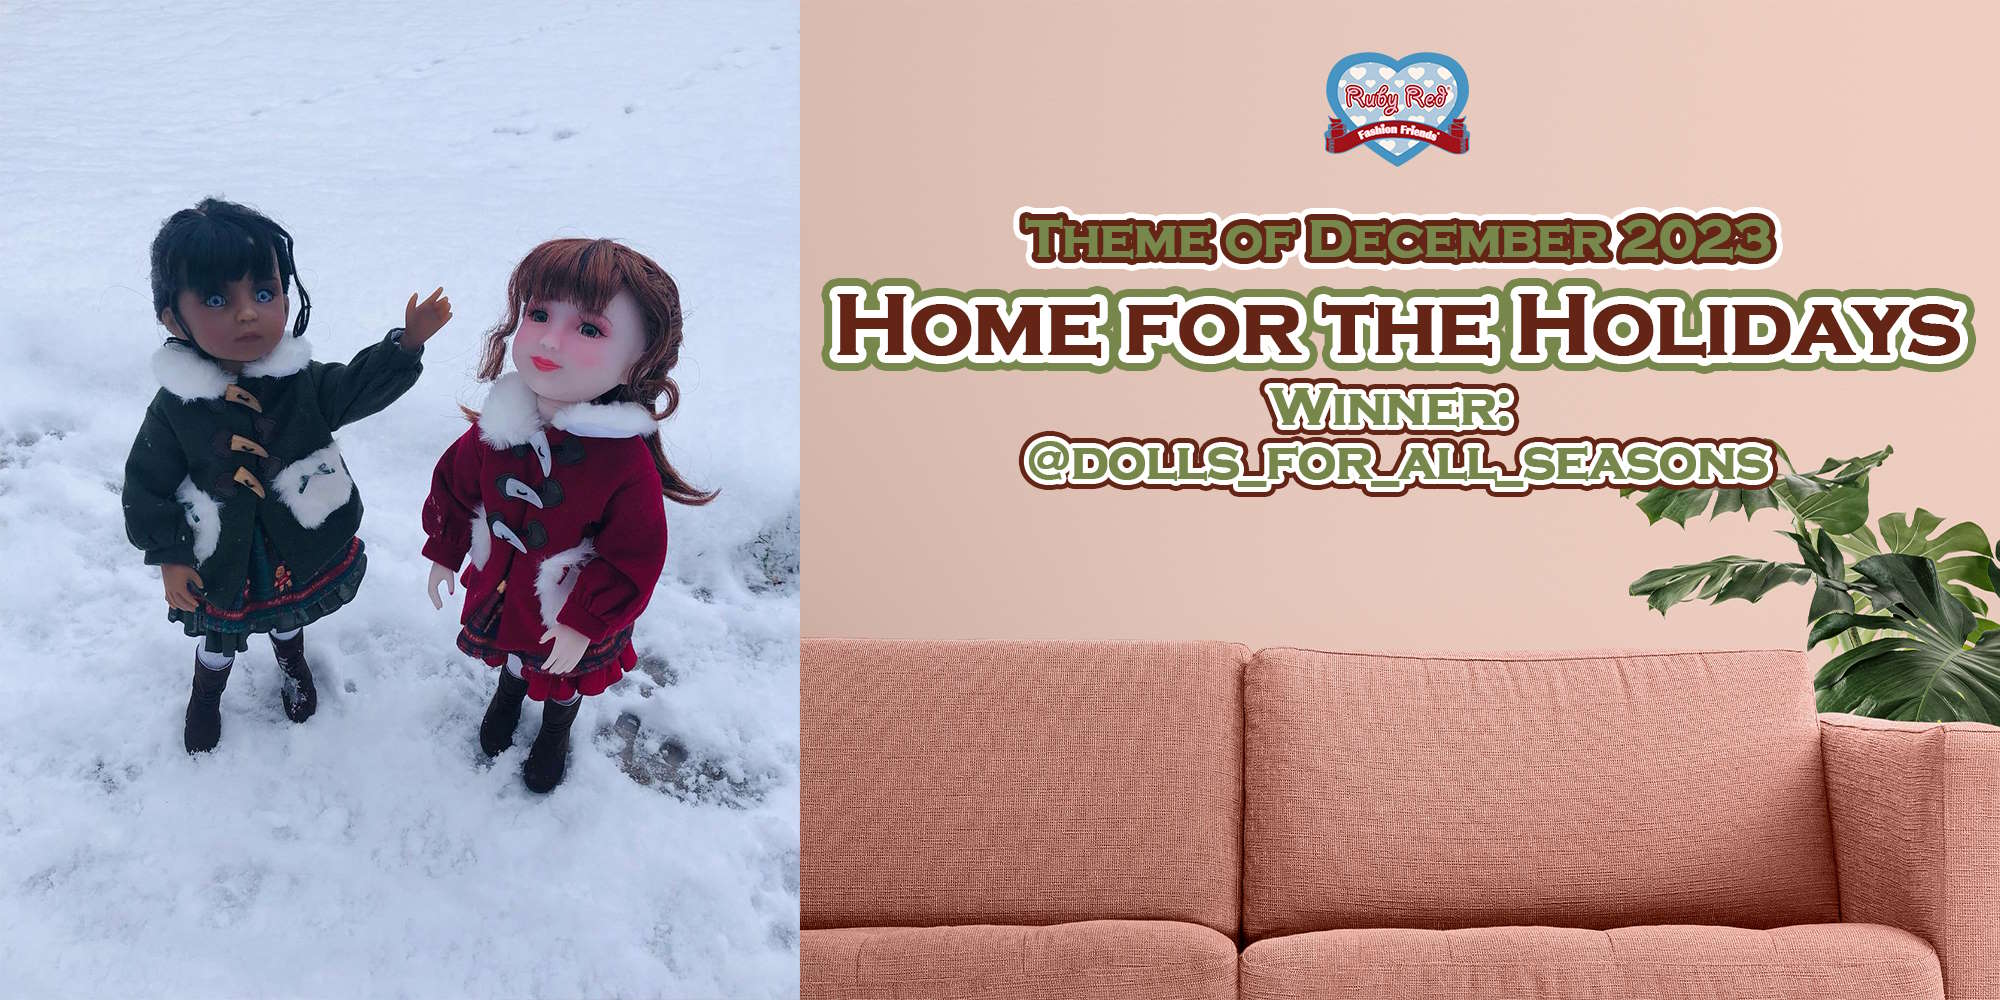 Ruby Red Fashion Friends Dolls - Photo of the month winner - Dec 2023